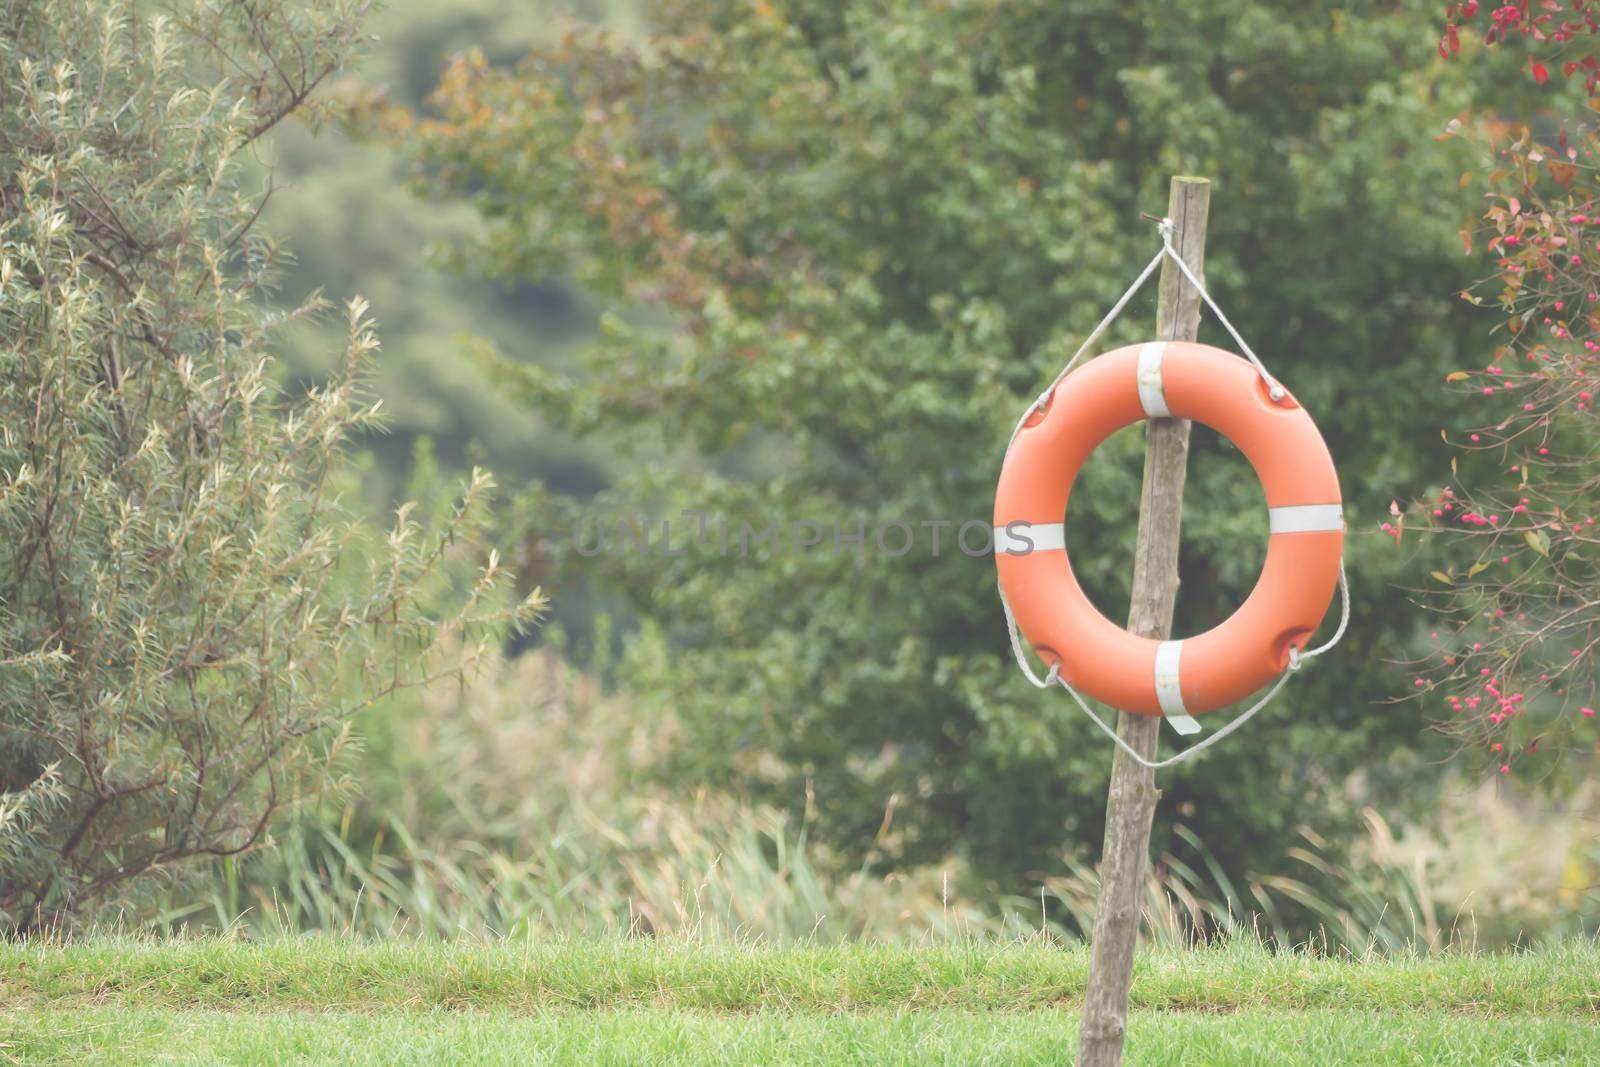 A lifebuoy hangs on the wood by sandra_fotodesign